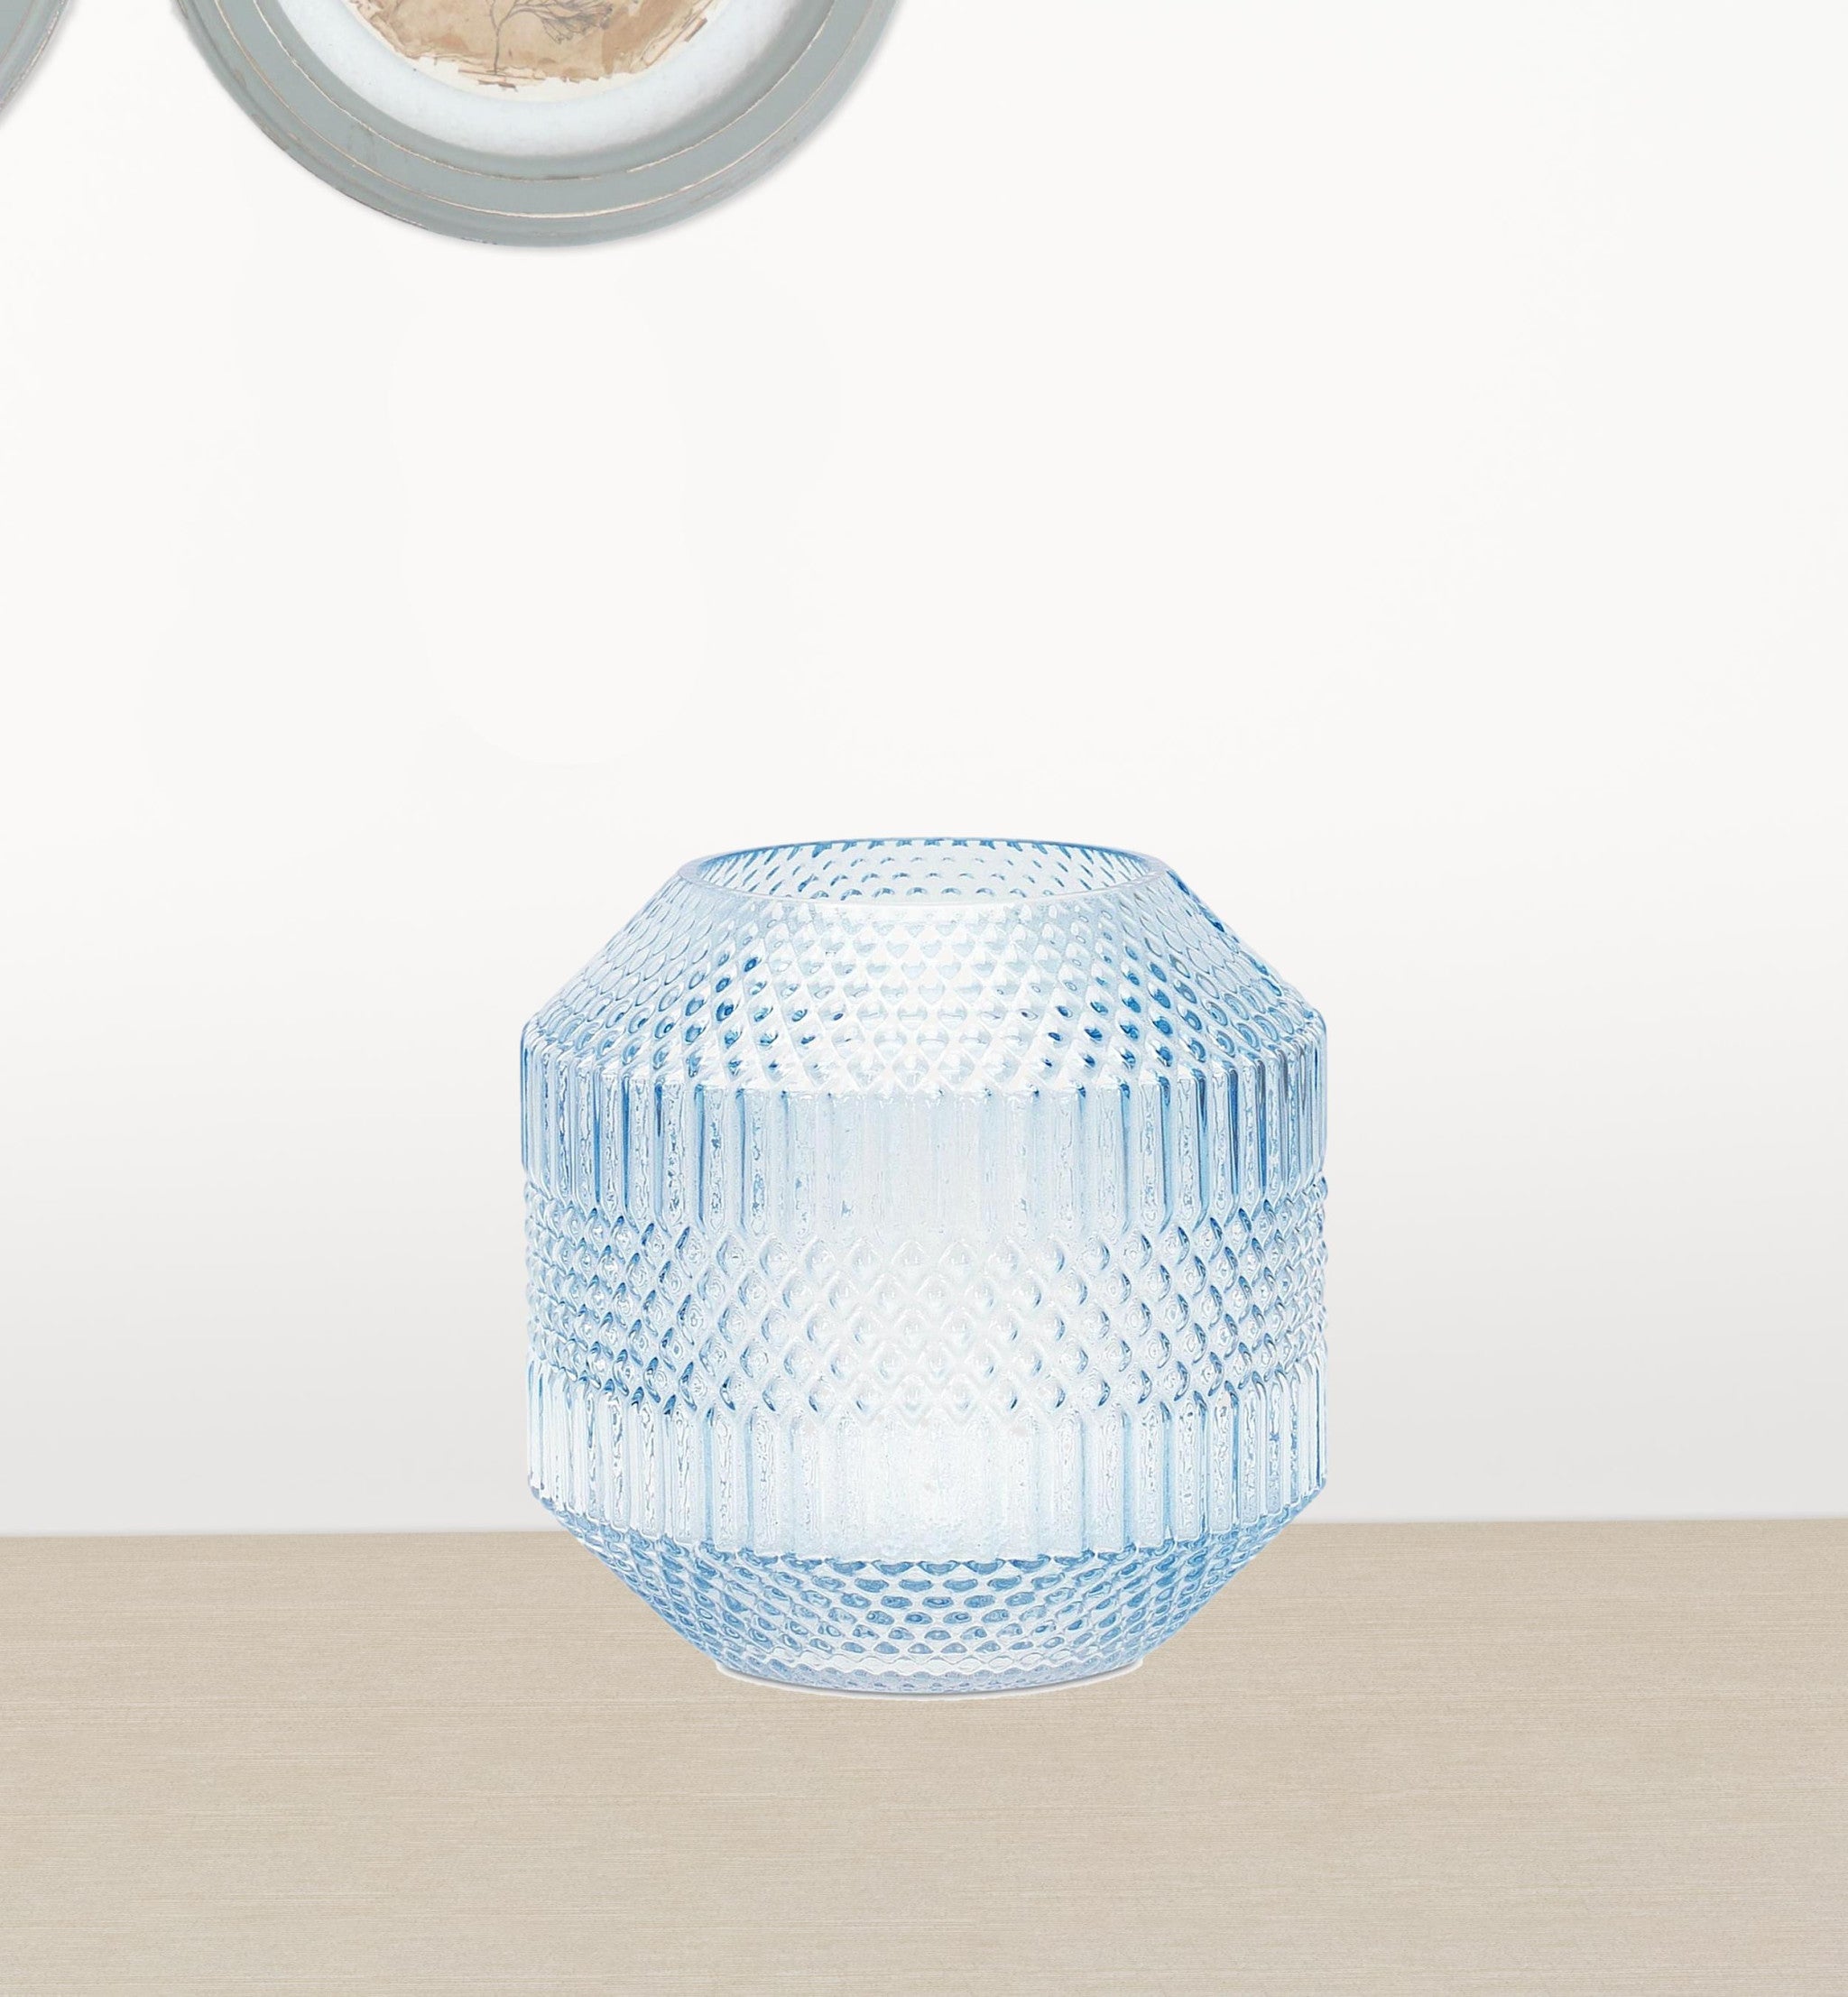 6.5" Crystal Glass Blue Round Table vase